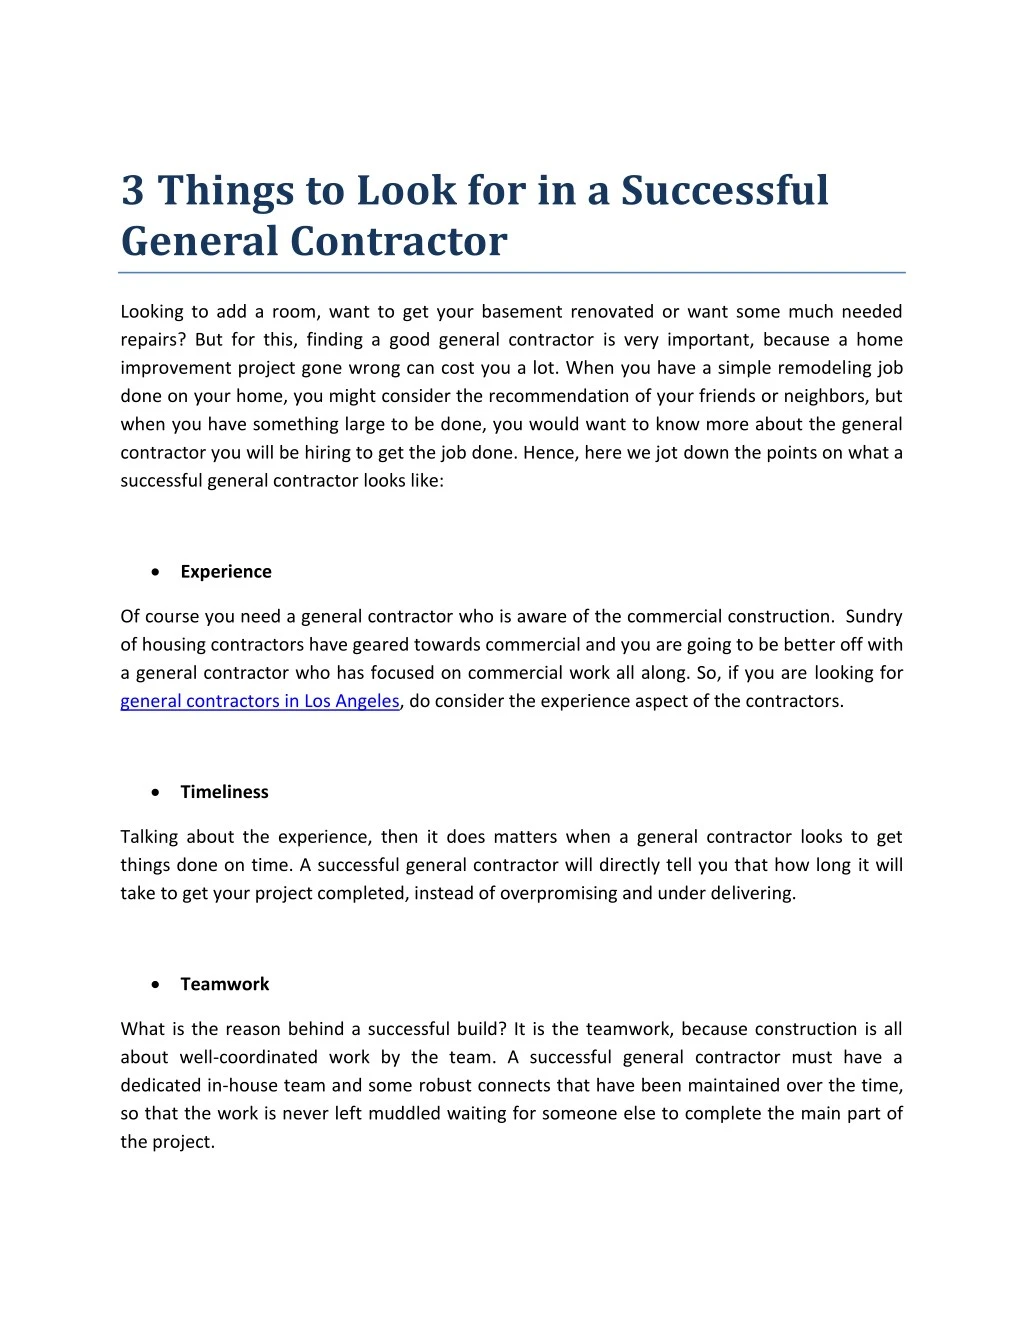 3 things to look for in a successful general